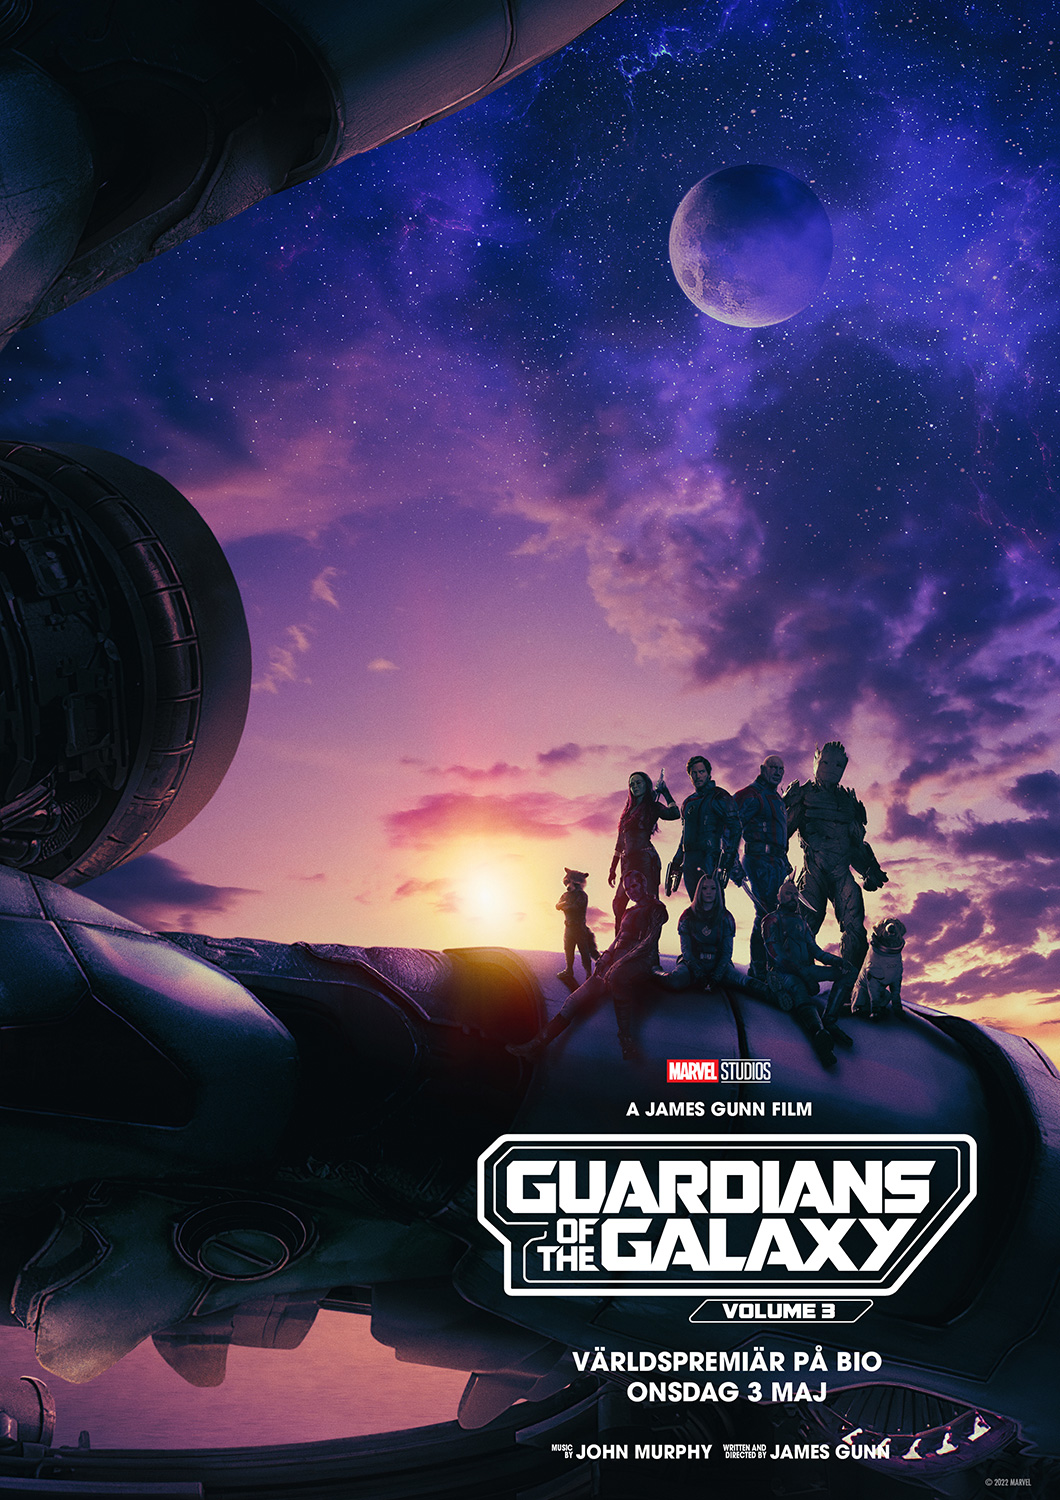 You are currently viewing <a href="https://www.filmstaden.se/film/NCG698160/guardians-of-the-galaxy-vol-3">Guardians of the Galaxy Vol. 3</a>